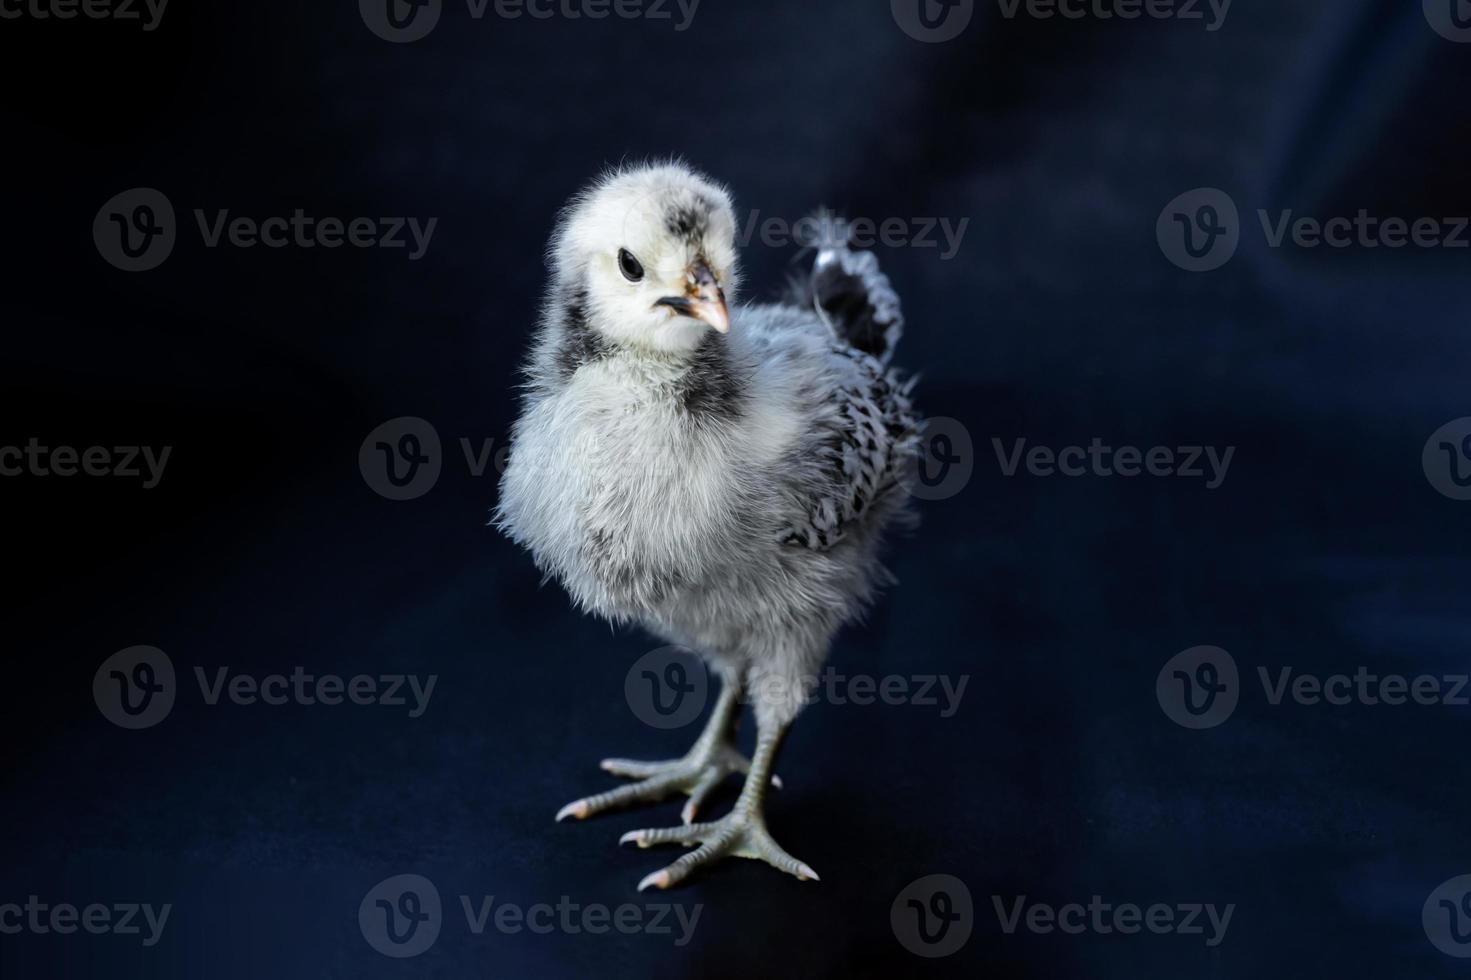 The young White Gray Appenzeller Chick It is a breed of chicken originating in Appenzell region of Switzerland is isolated standing on the cloth of blue colour dark background. photo